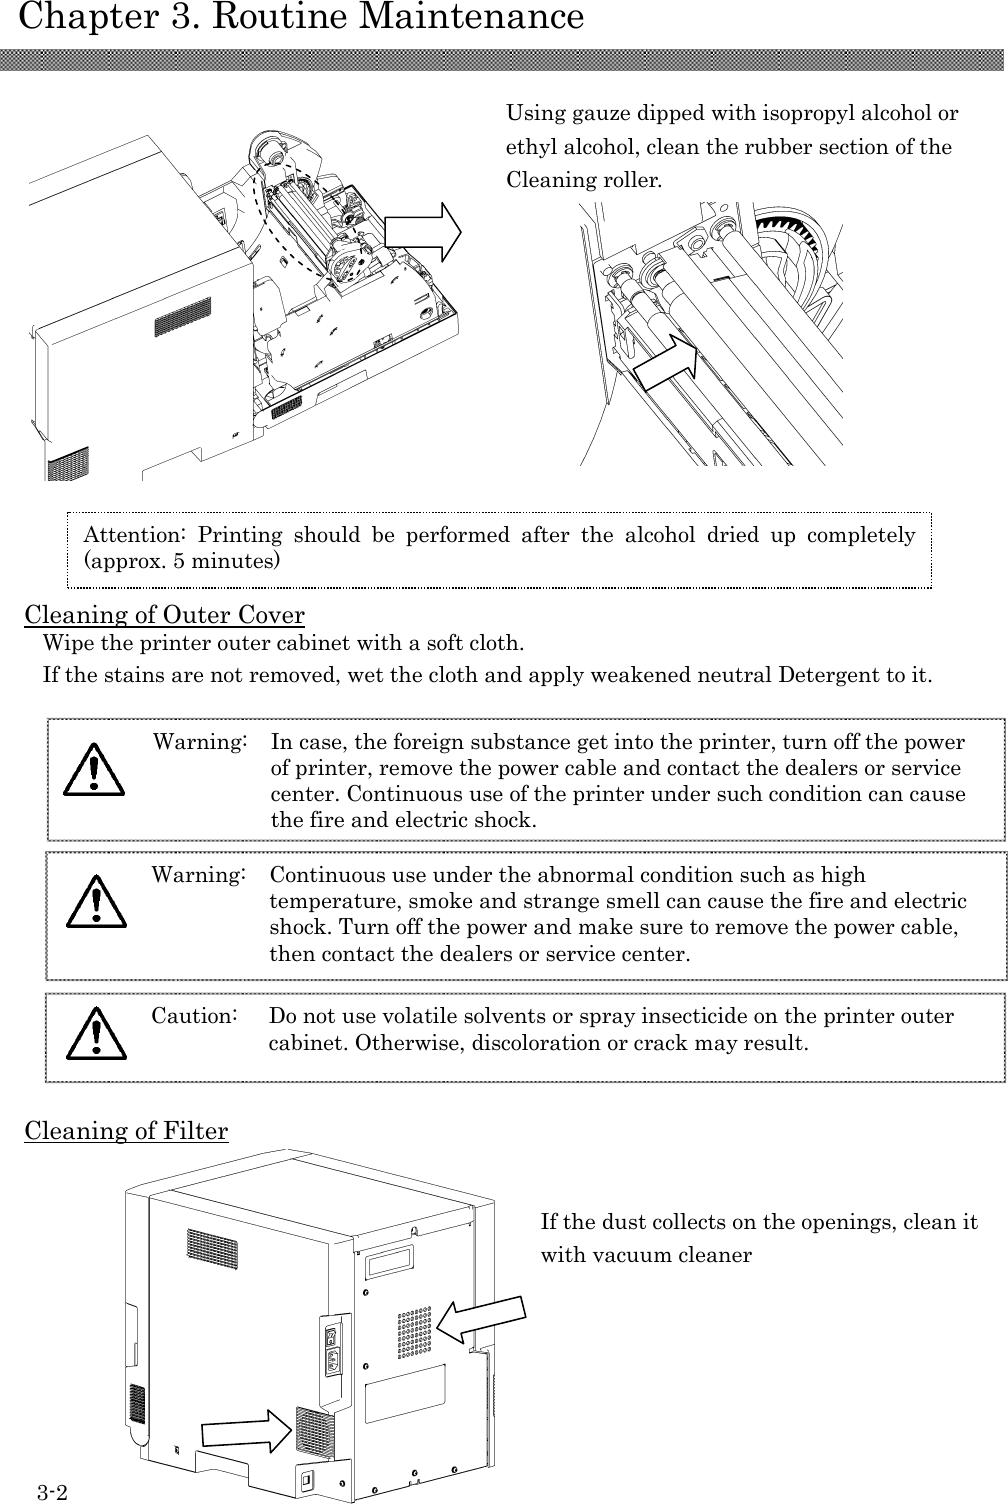    Chapter 3. Routine Maintenance 3-2               Using gauze dipped with isopropyl alcohol or ethyl alcohol, clean the rubber section of the Cleaning roller.     Cleaning of Outer Cover Wipe the printer outer cabinet with a soft cloth. If the stains are not removed, wet the cloth and apply weakened neutral Detergent to it.  Cleaning of Filter             Attention:  Printing  should  be  performed  after  the  alcohol  dried  up  completely (approx. 5 minutes) Caution:  Do not use volatile solvents or spray insecticide on the printer outer cabinet. Otherwise, discoloration or crack may result.   Warning:  Continuous use under the abnormal condition such as high temperature, smoke and strange smell can cause the fire and electric shock. Turn off the power and make sure to remove the power cable, then contact the dealers or service center.   Warning:  In case, the foreign substance get into the printer, turn off the power of printer, remove the power cable and contact the dealers or service center. Continuous use of the printer under such condition can cause the fire and electric shock.   If the dust collects on the openings, clean it with vacuum cleaner 